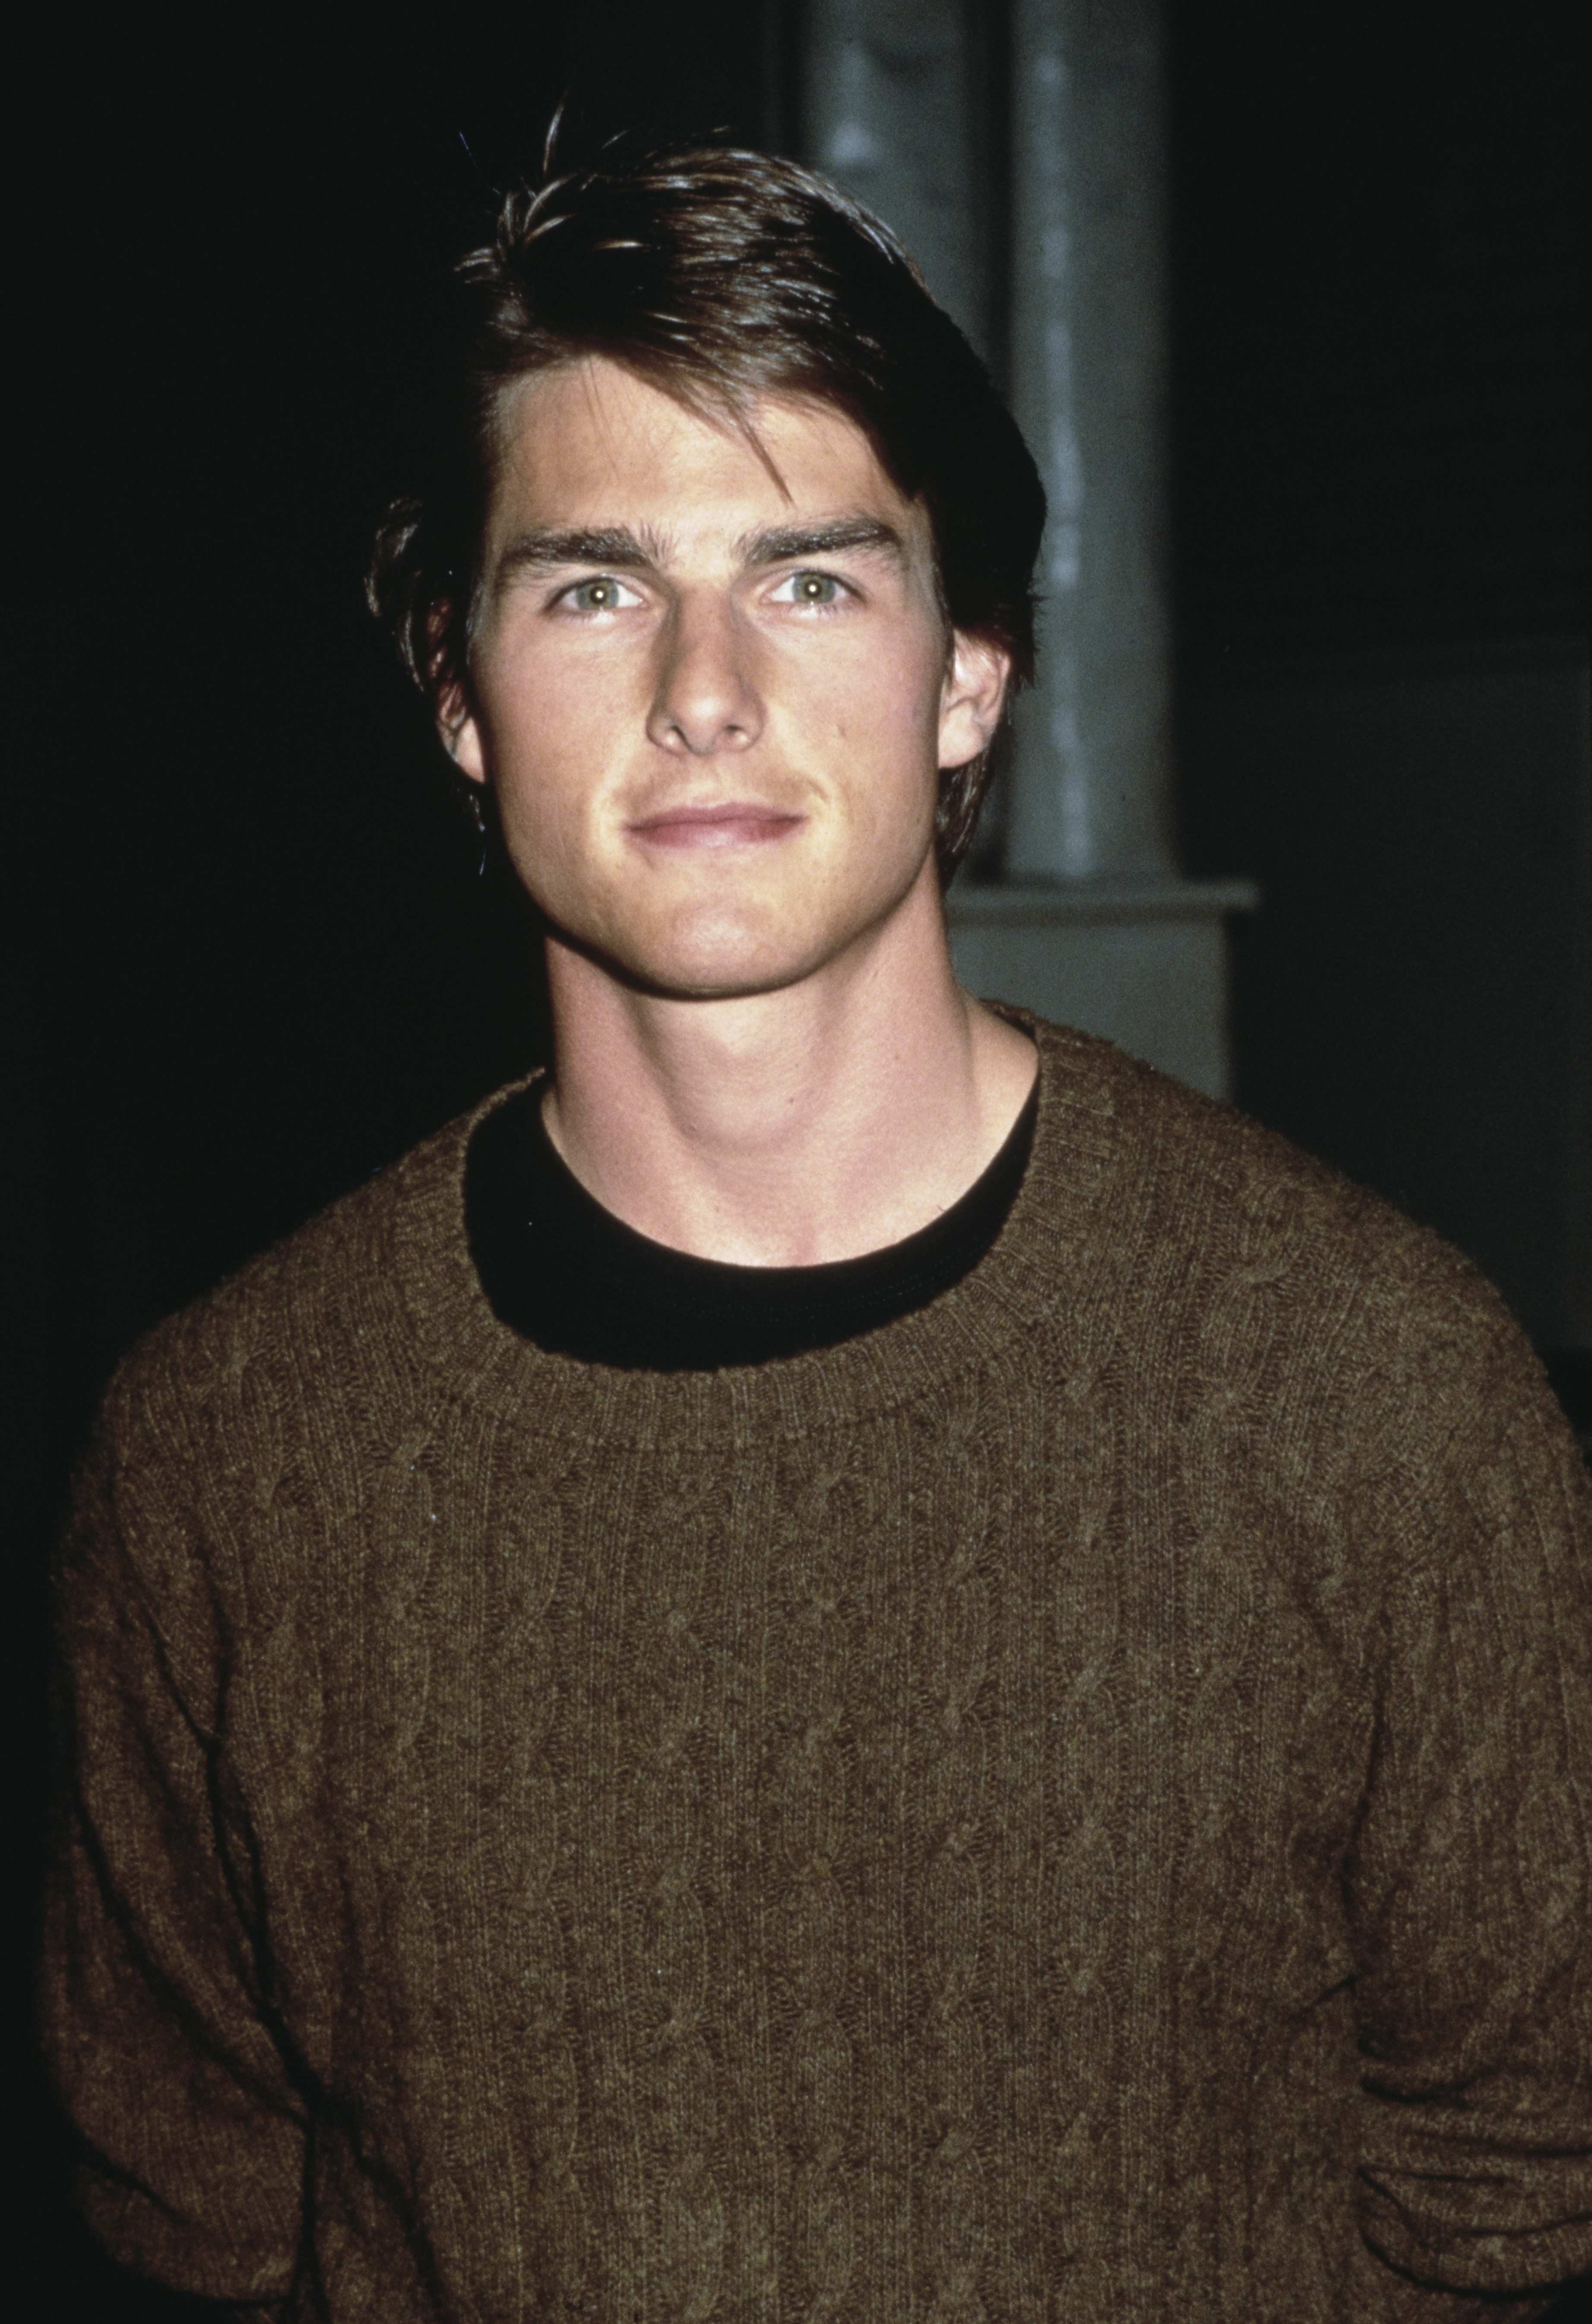 Tom Cruise attending an event, circa 1990s | Source: Getty Images